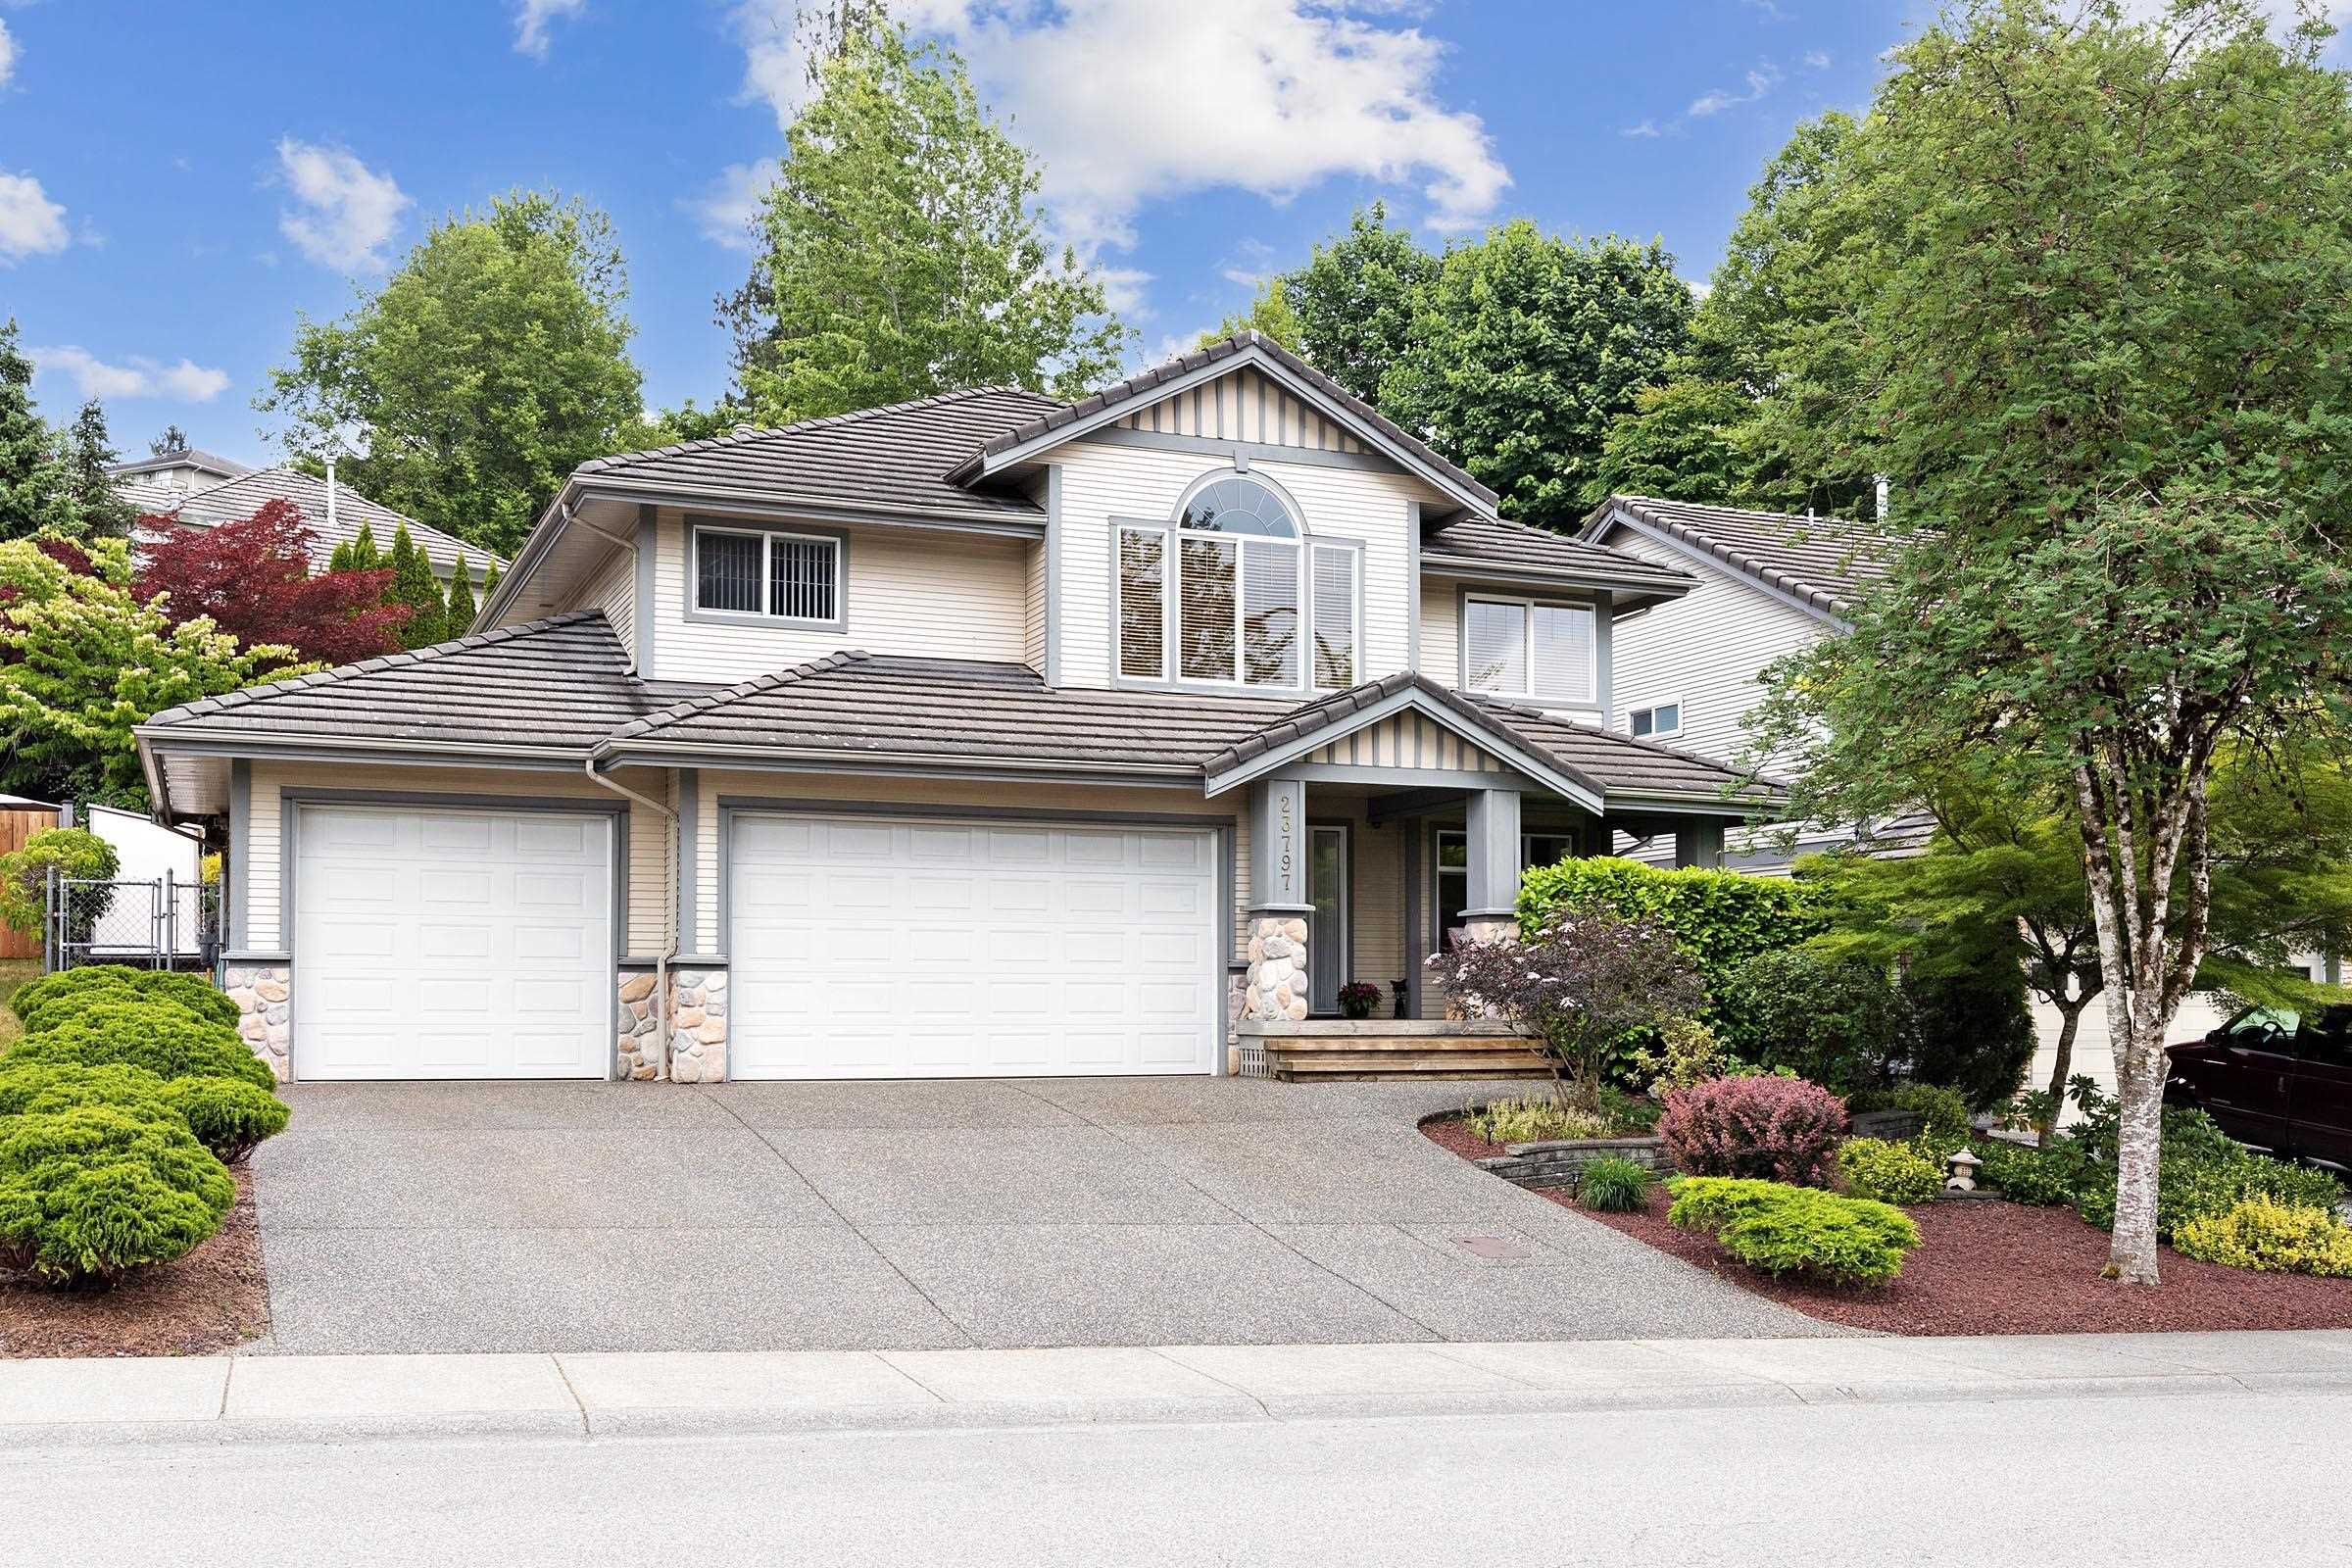 I have sold a property at 23797 105TH AVE in Maple Ridge
